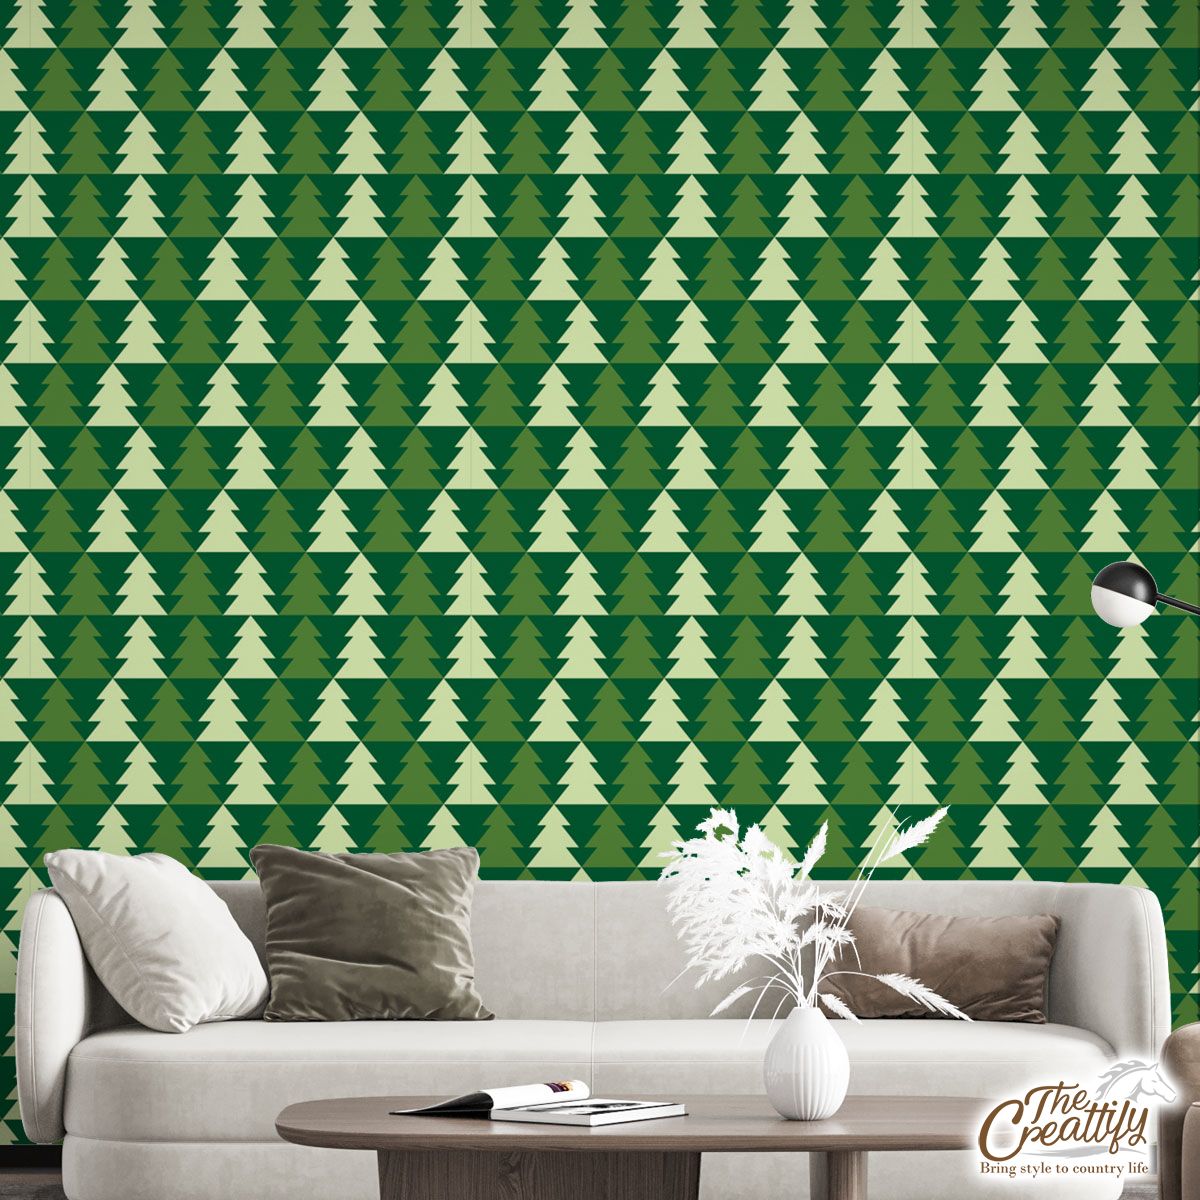 Green And White Pine Tree Silhouette Seamless Pattern Wall Mural